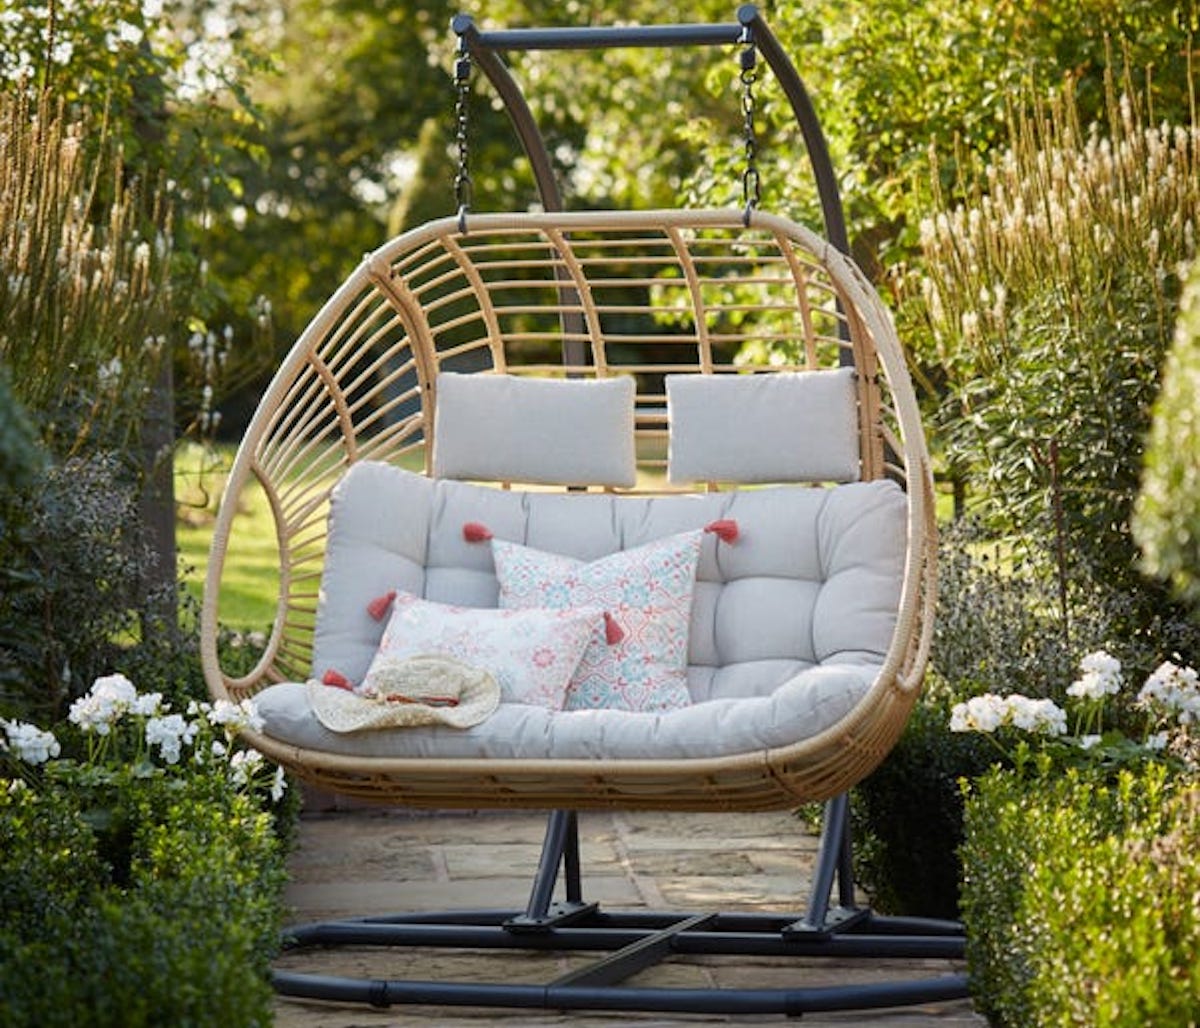 Wicker egg chair hanging in garden with cushions. Best garden party furniture.